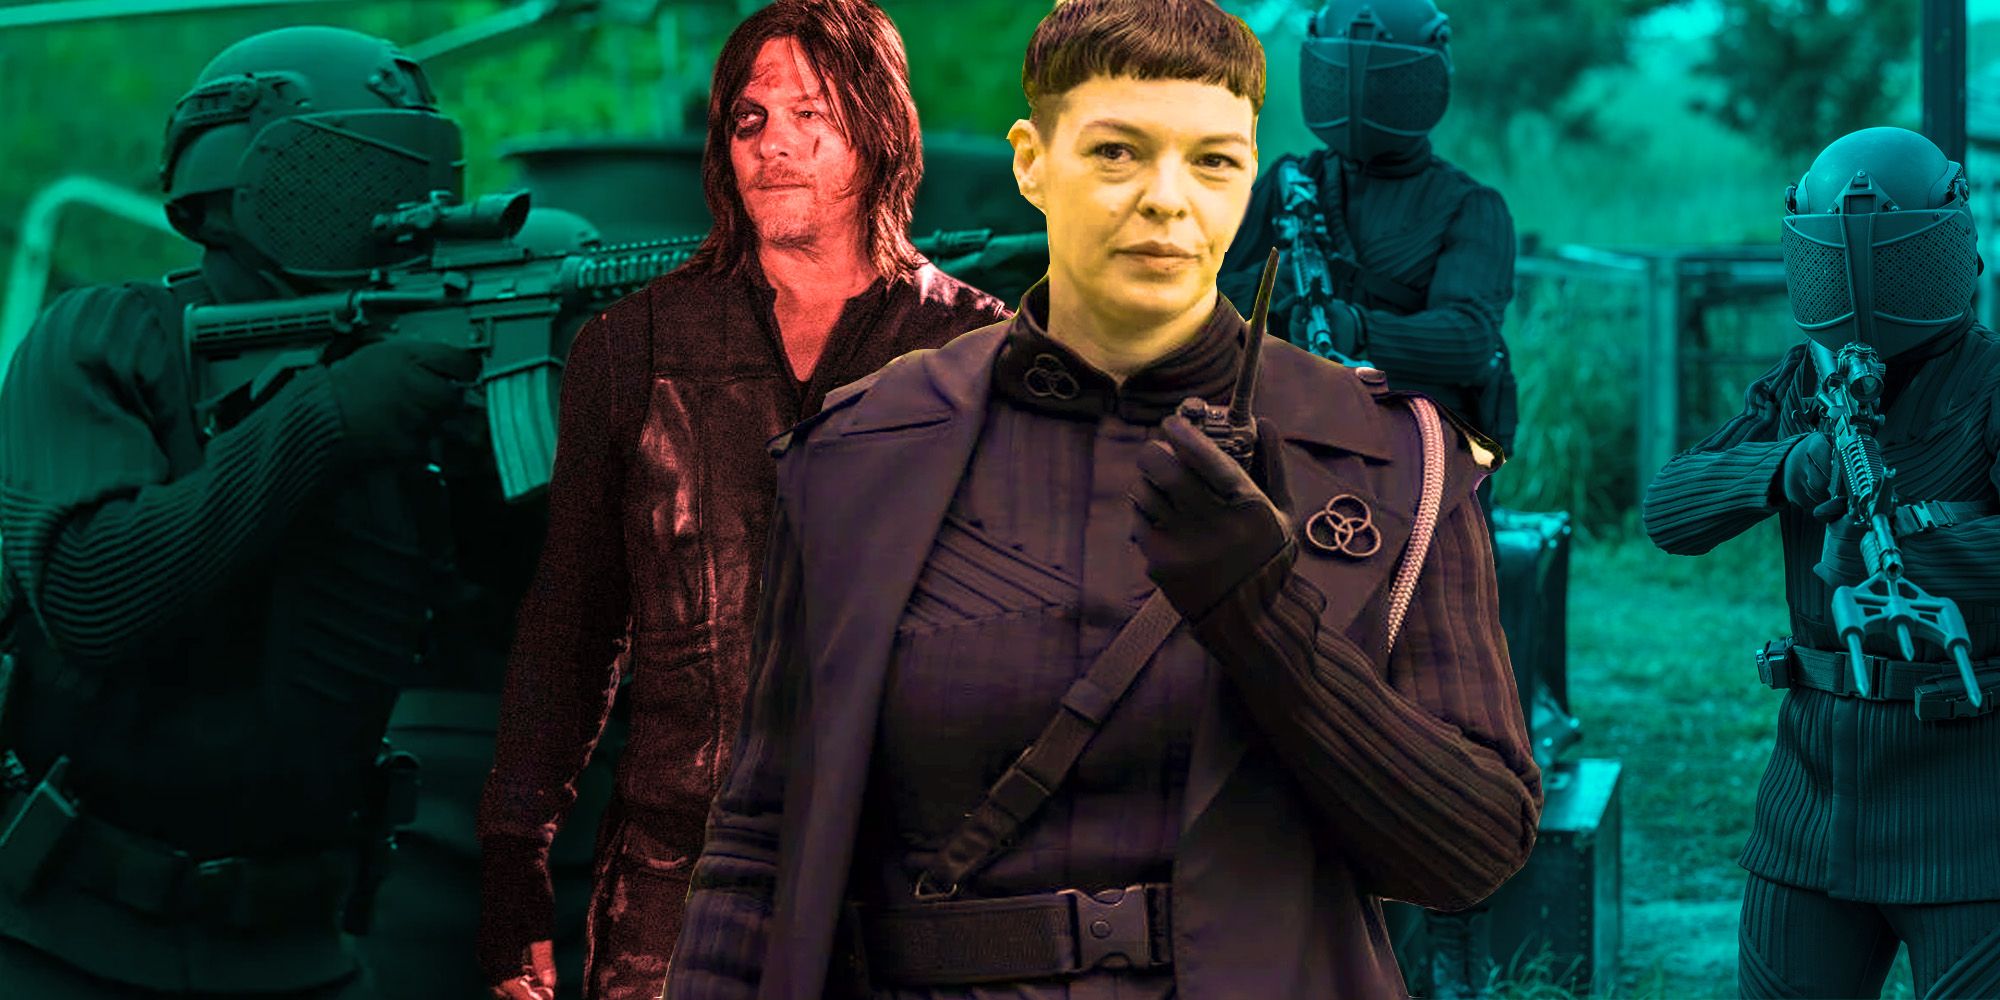 Custom image of the CRM with Jadis and Daryl from The Walking Dead centered